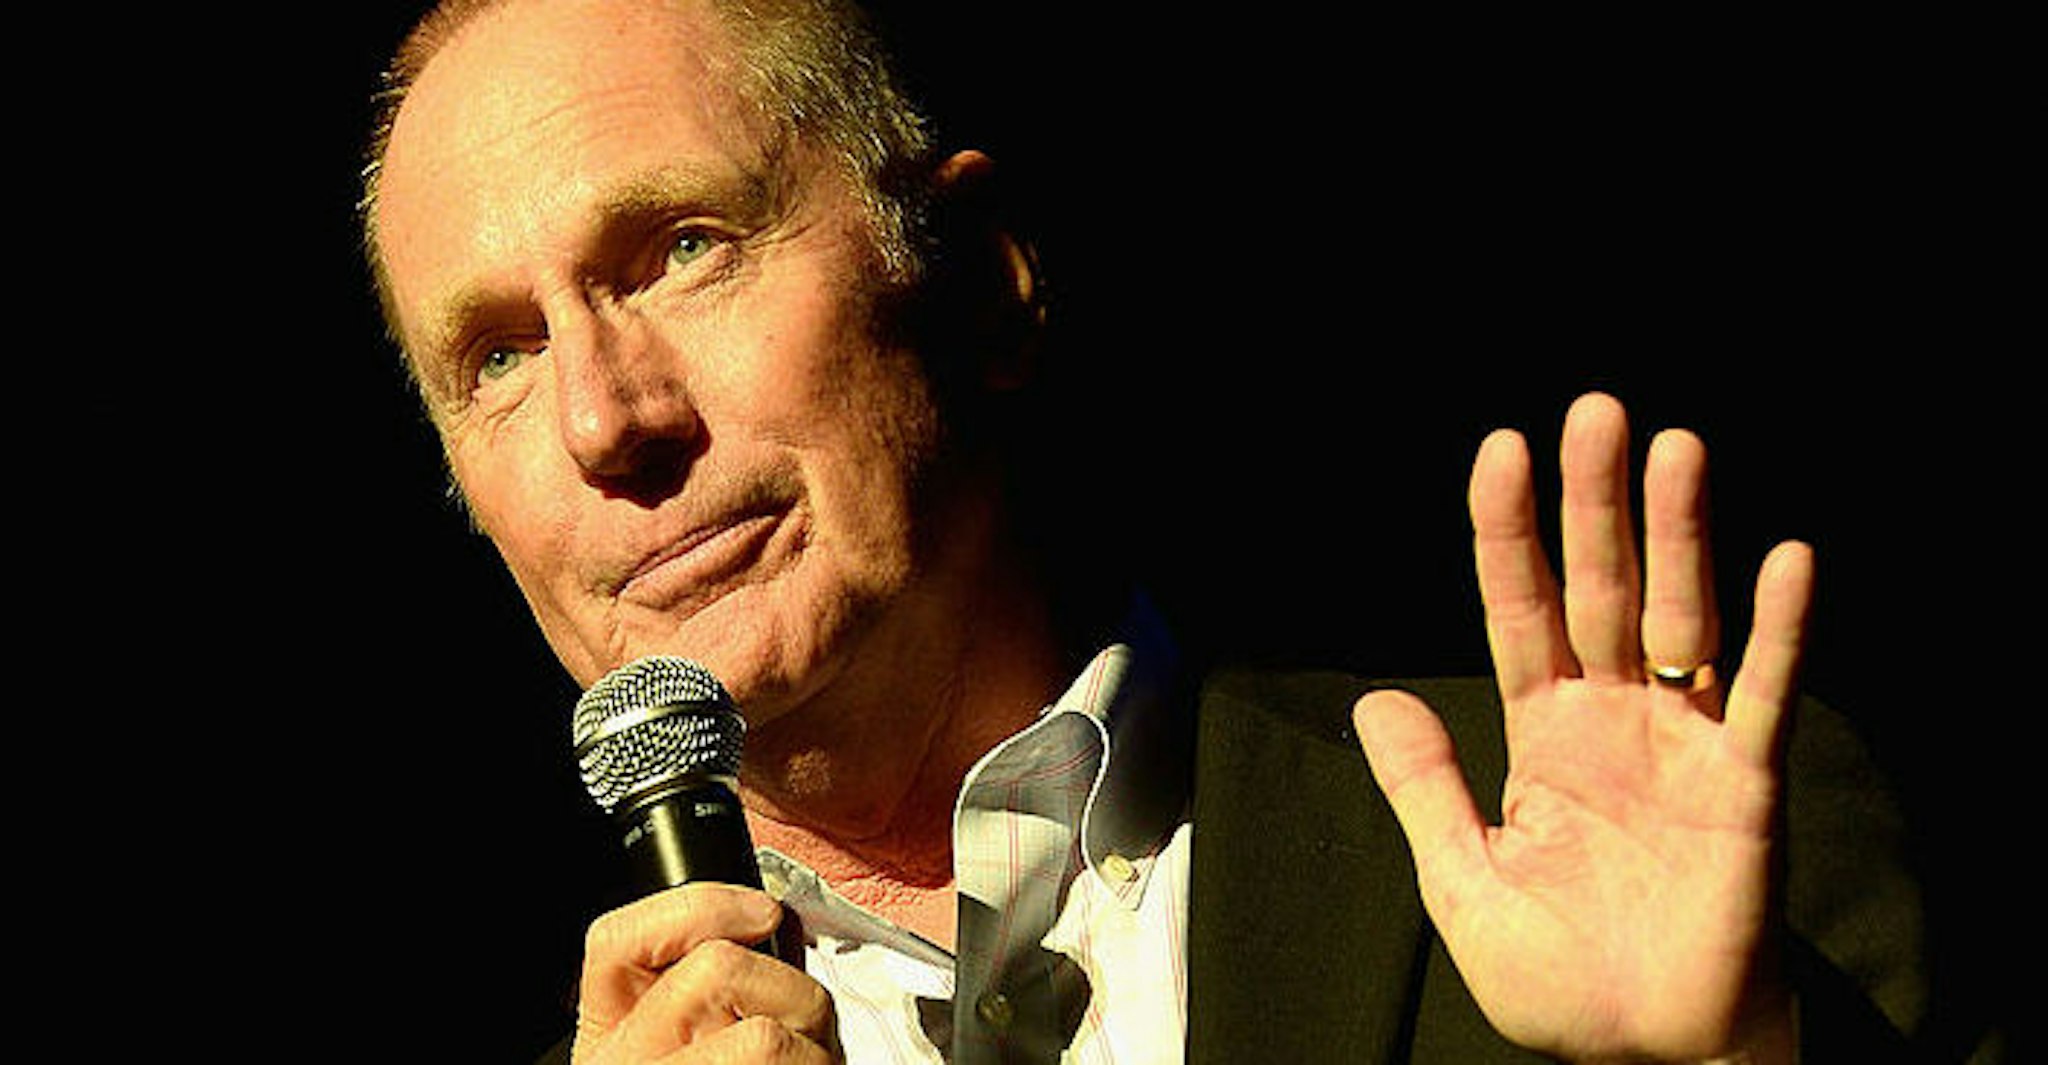 Max Lucado Apologizes For Hurting LGBT Community Amid Outrage Following